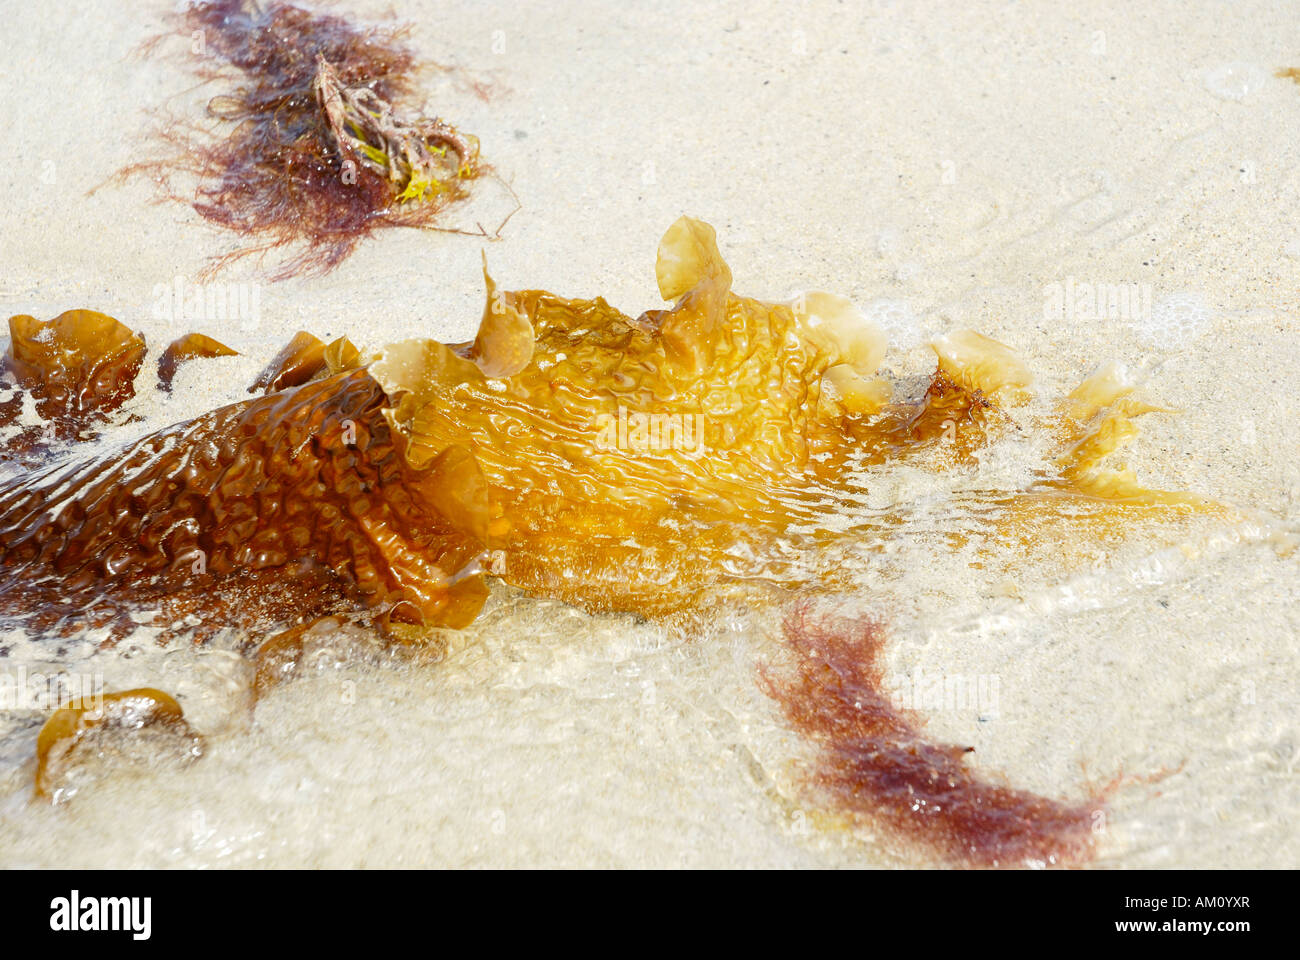 Deatial view of kelp leaf displaying shrivelled surface on atlanic sand beach, Ireland Stock Photo